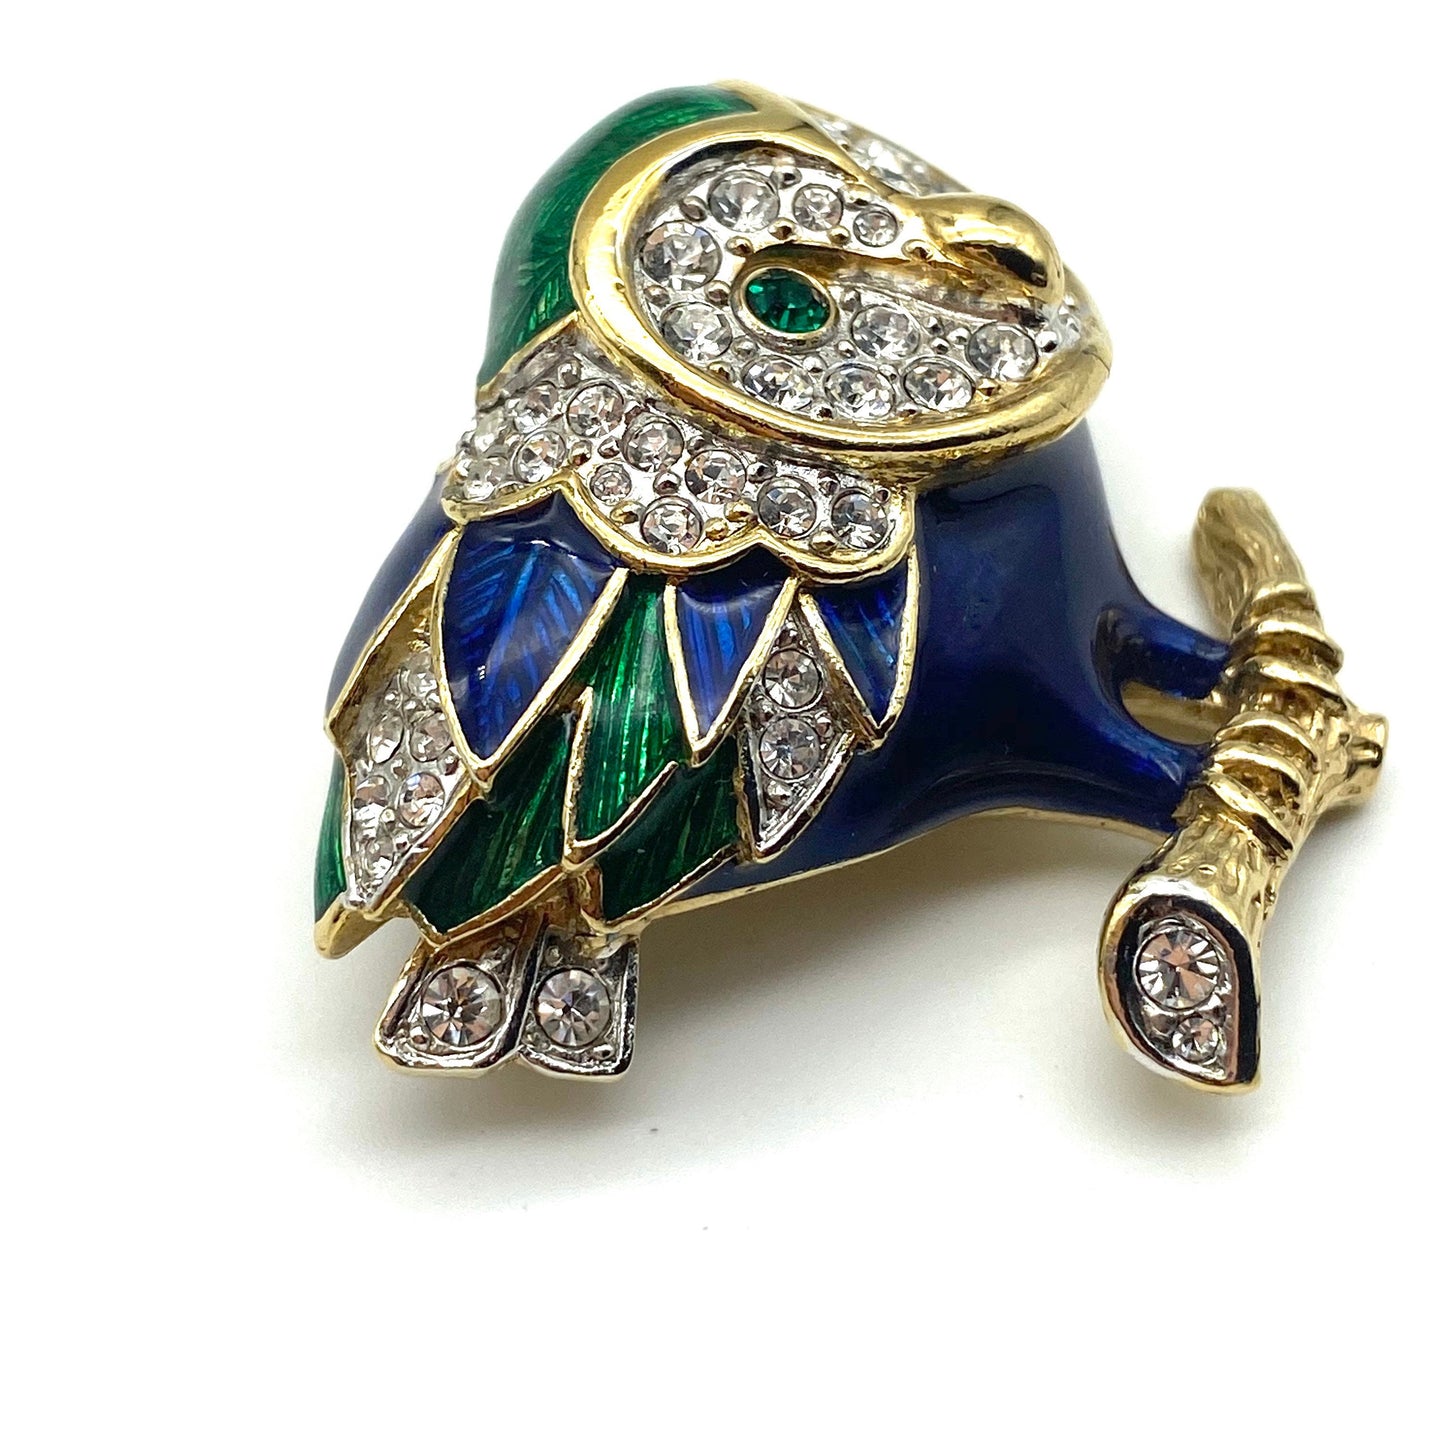 Attwood and Sawyer 22ct Gold Plated Enamel Owl Brooch on Branch